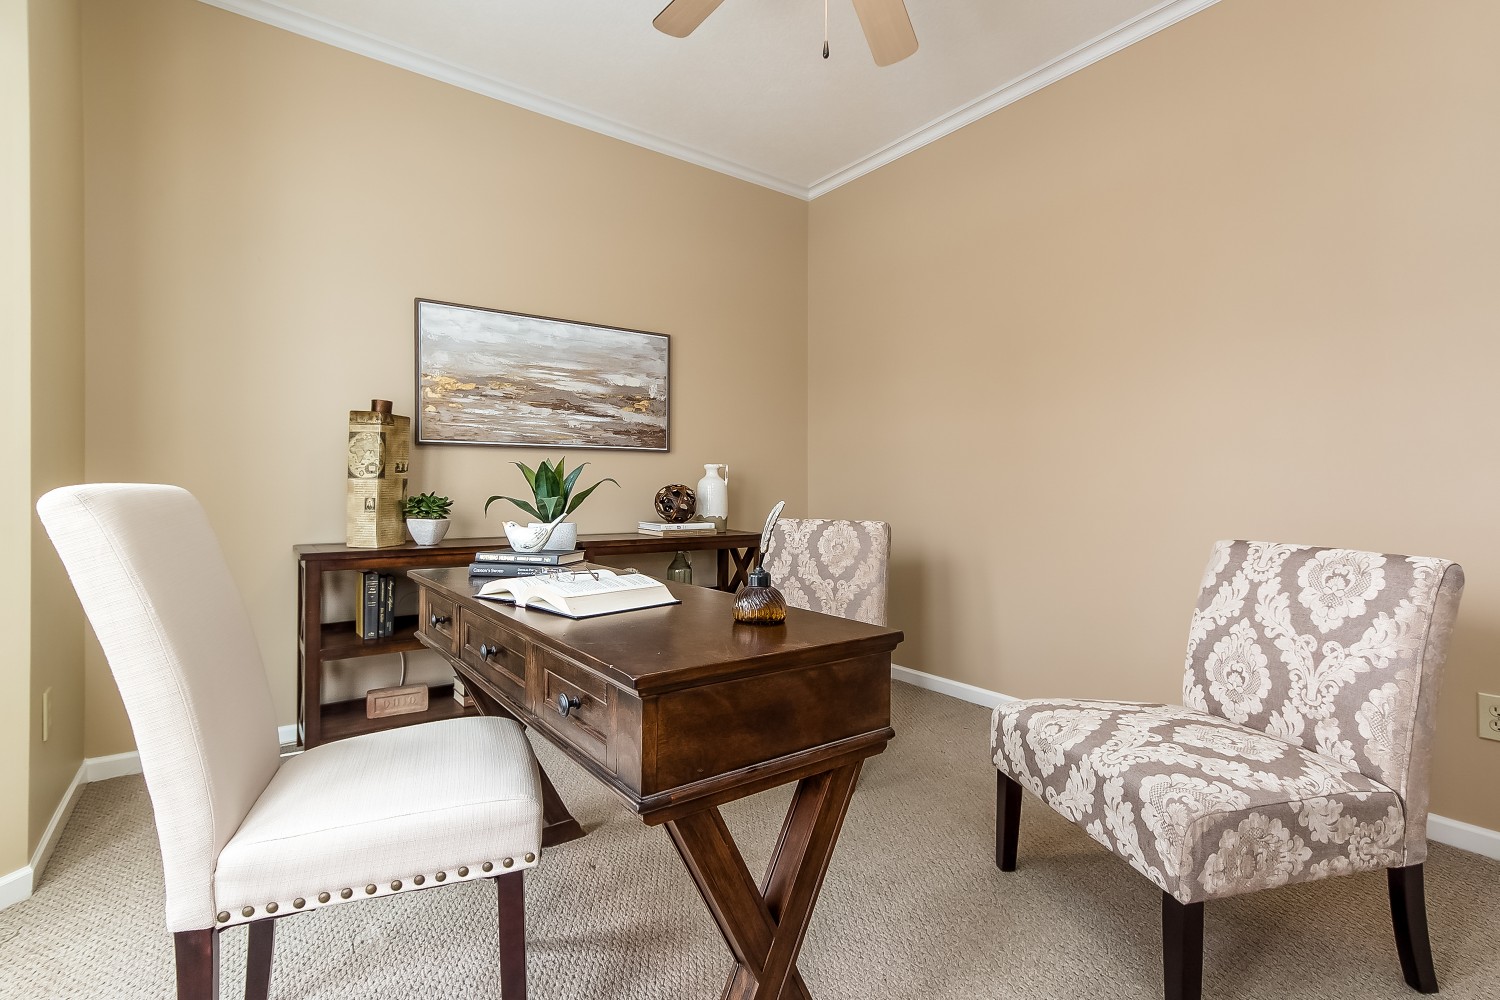 Staged by Sanctuary Staging